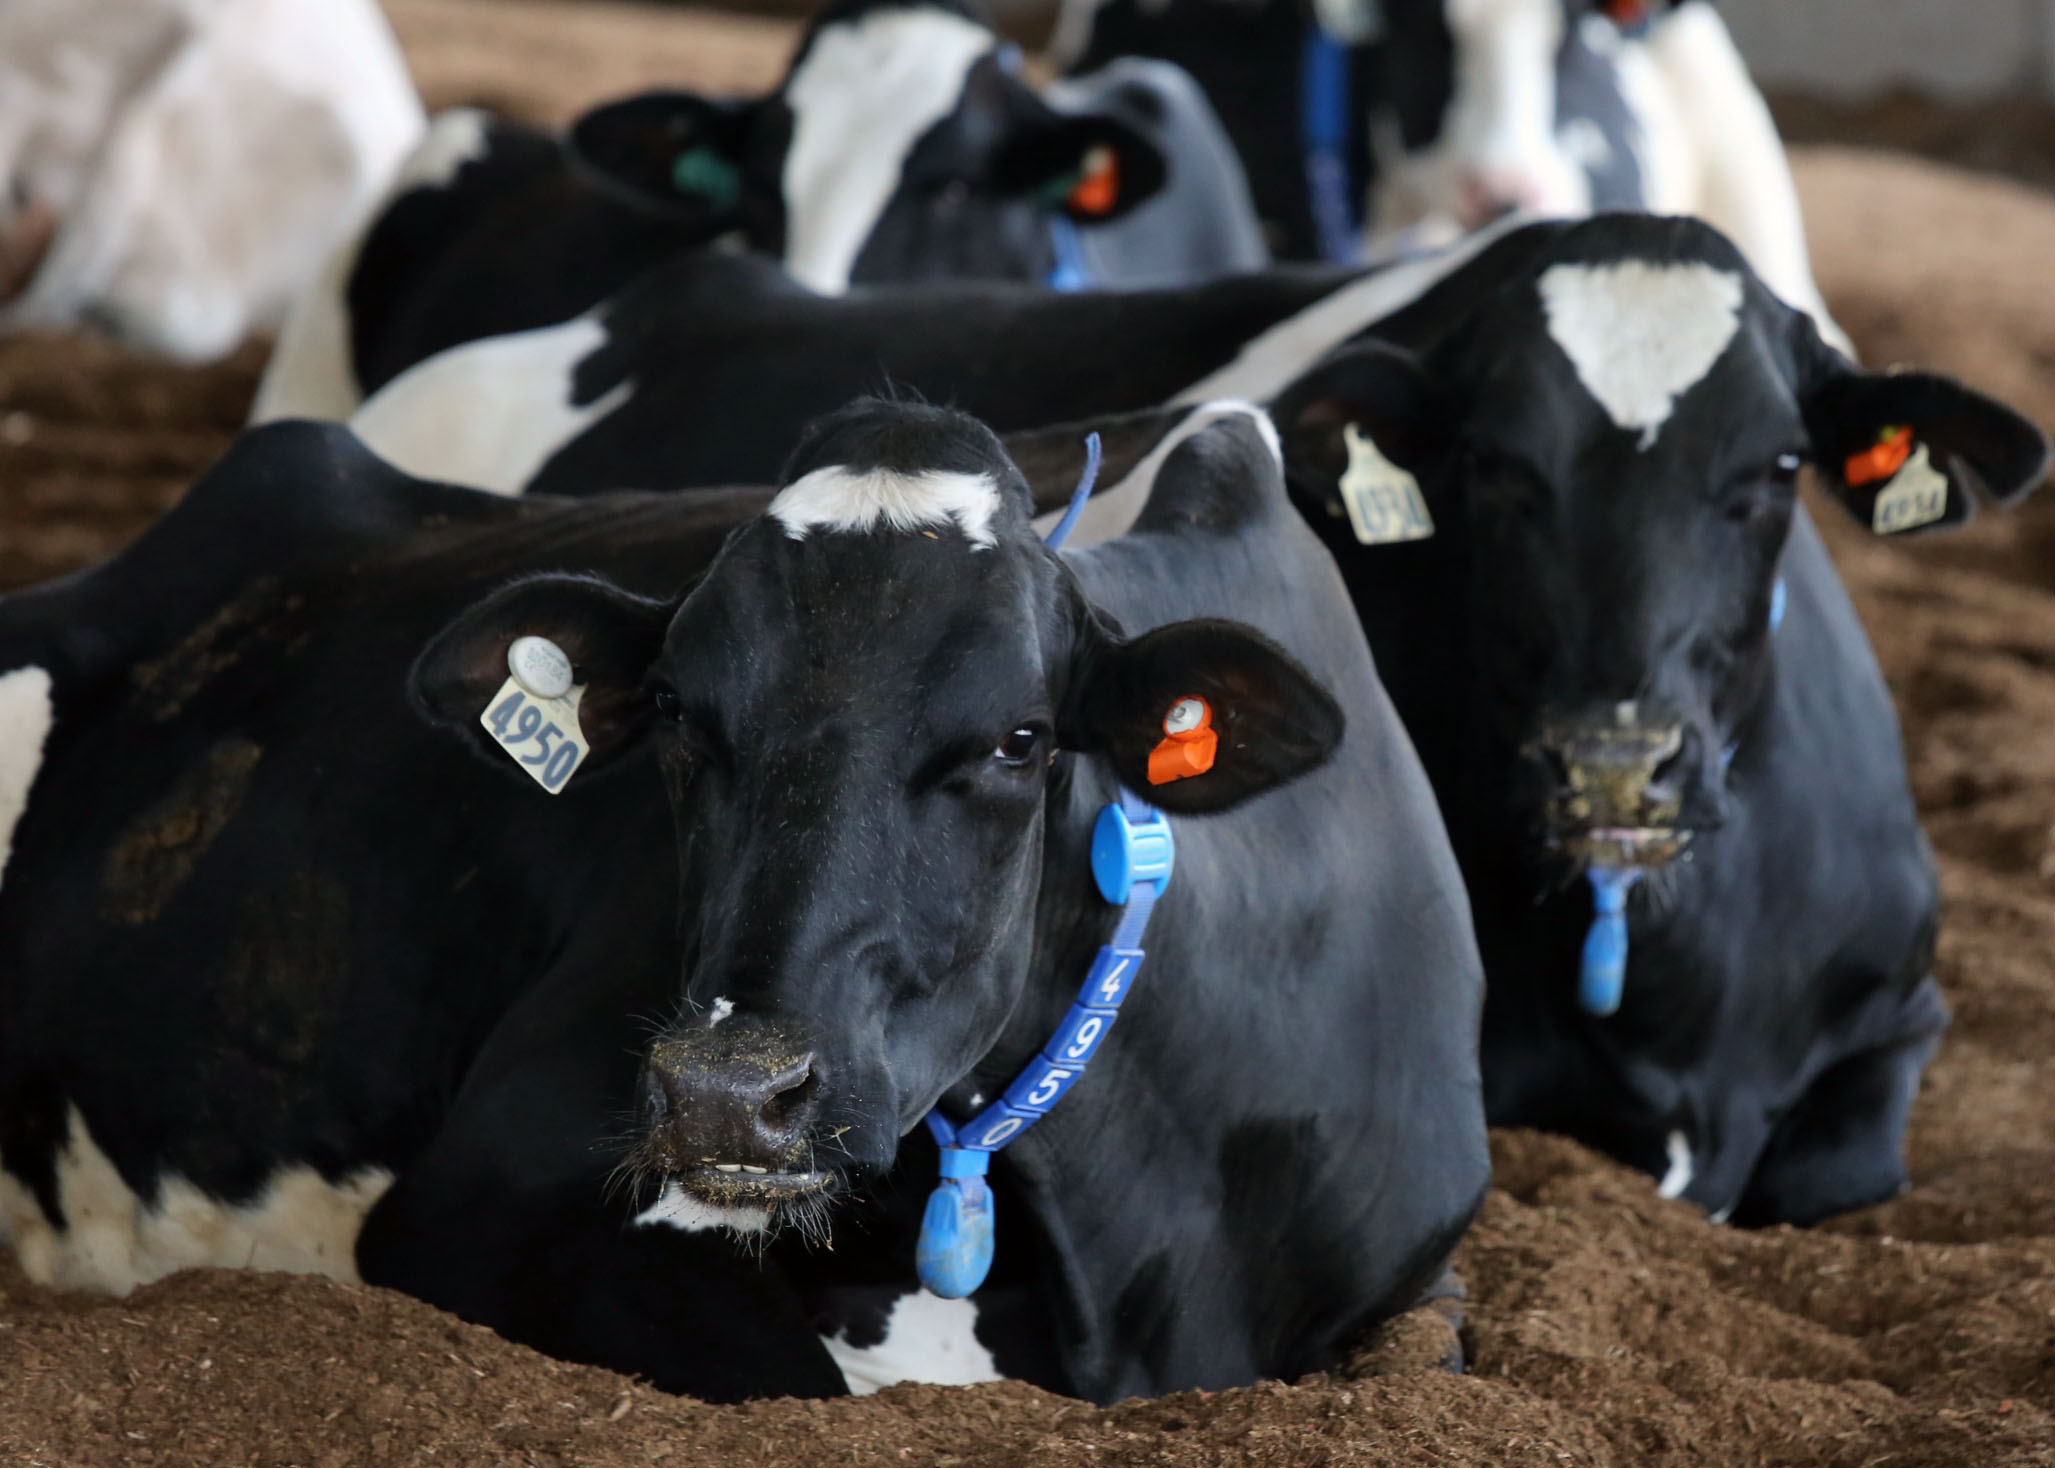 Cow comfort is a main focus of the research being conducted at UK